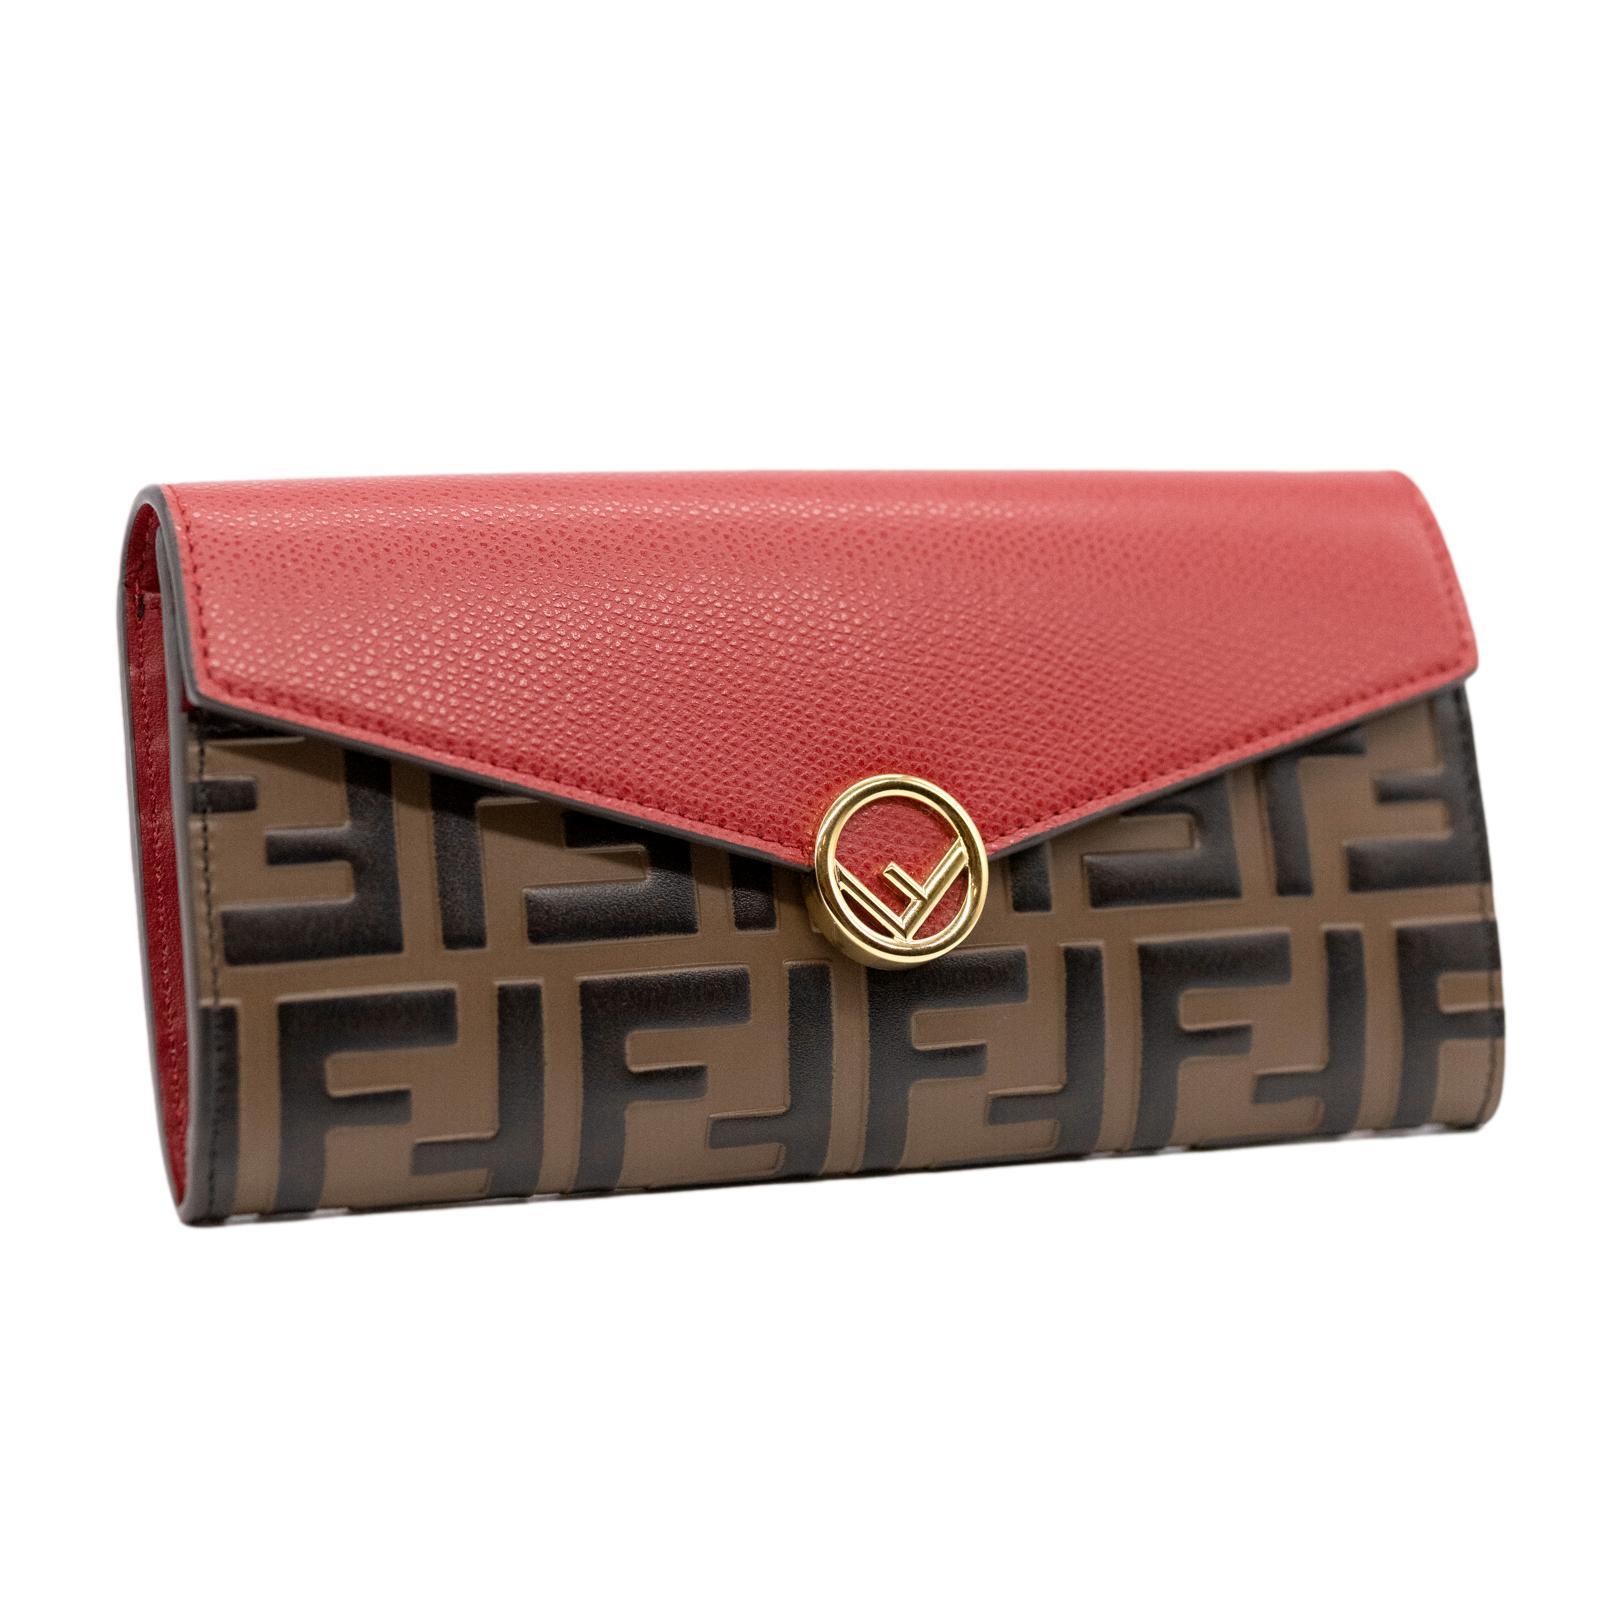 Fendi Continental Red Hand Painted Embossed Leather Wallet, 2020. This iconic and highly desirable wallet by premiere fashion house Fendi was hand crafted in Italy to the highest luxury standards from tumbled cruise calfskin leather and gold plated